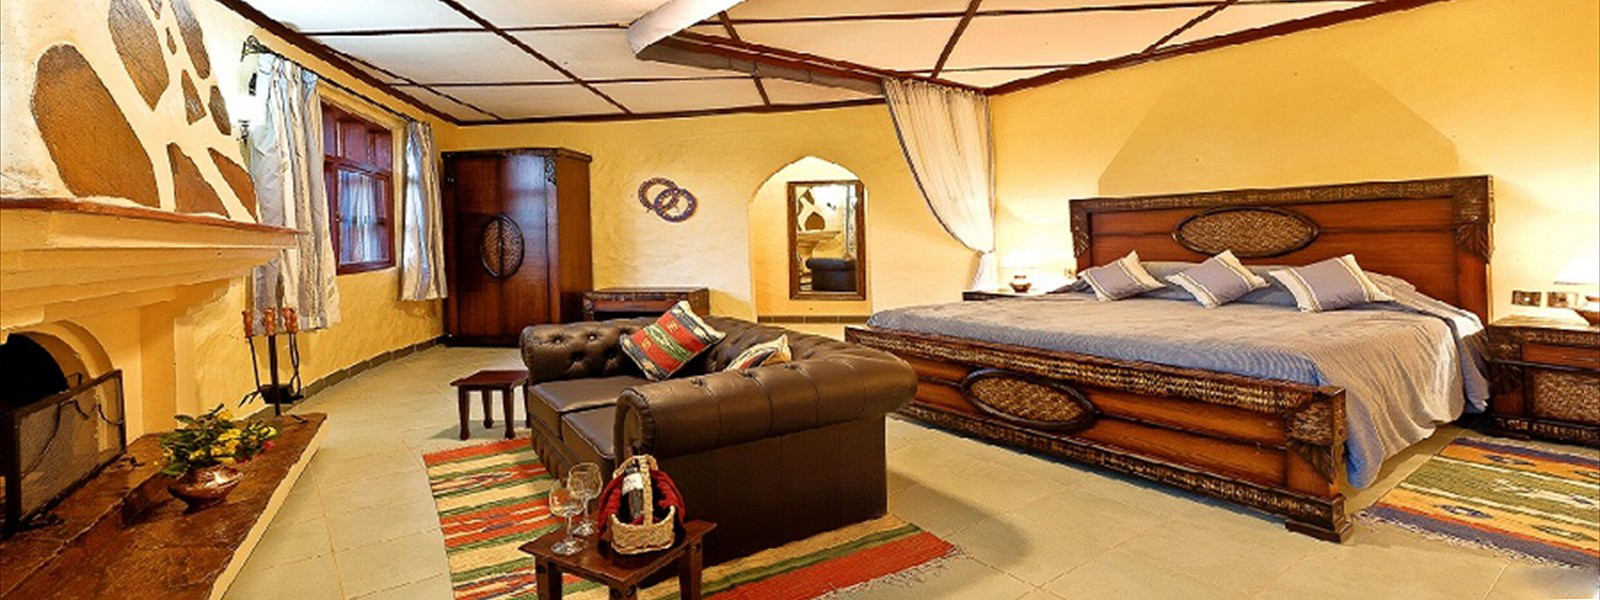 TOURIST ACTIVITIES AMBOSELI NATIONAL PARK,  ATTRACTIONS, ACTIVITIES,    MOST POPULAR LODGES,  GAME VIEWING, BEST LODGES IN AMBOSELI NATIONAL PARK, POPULAR LODGES,amboseli-sopa-suite1